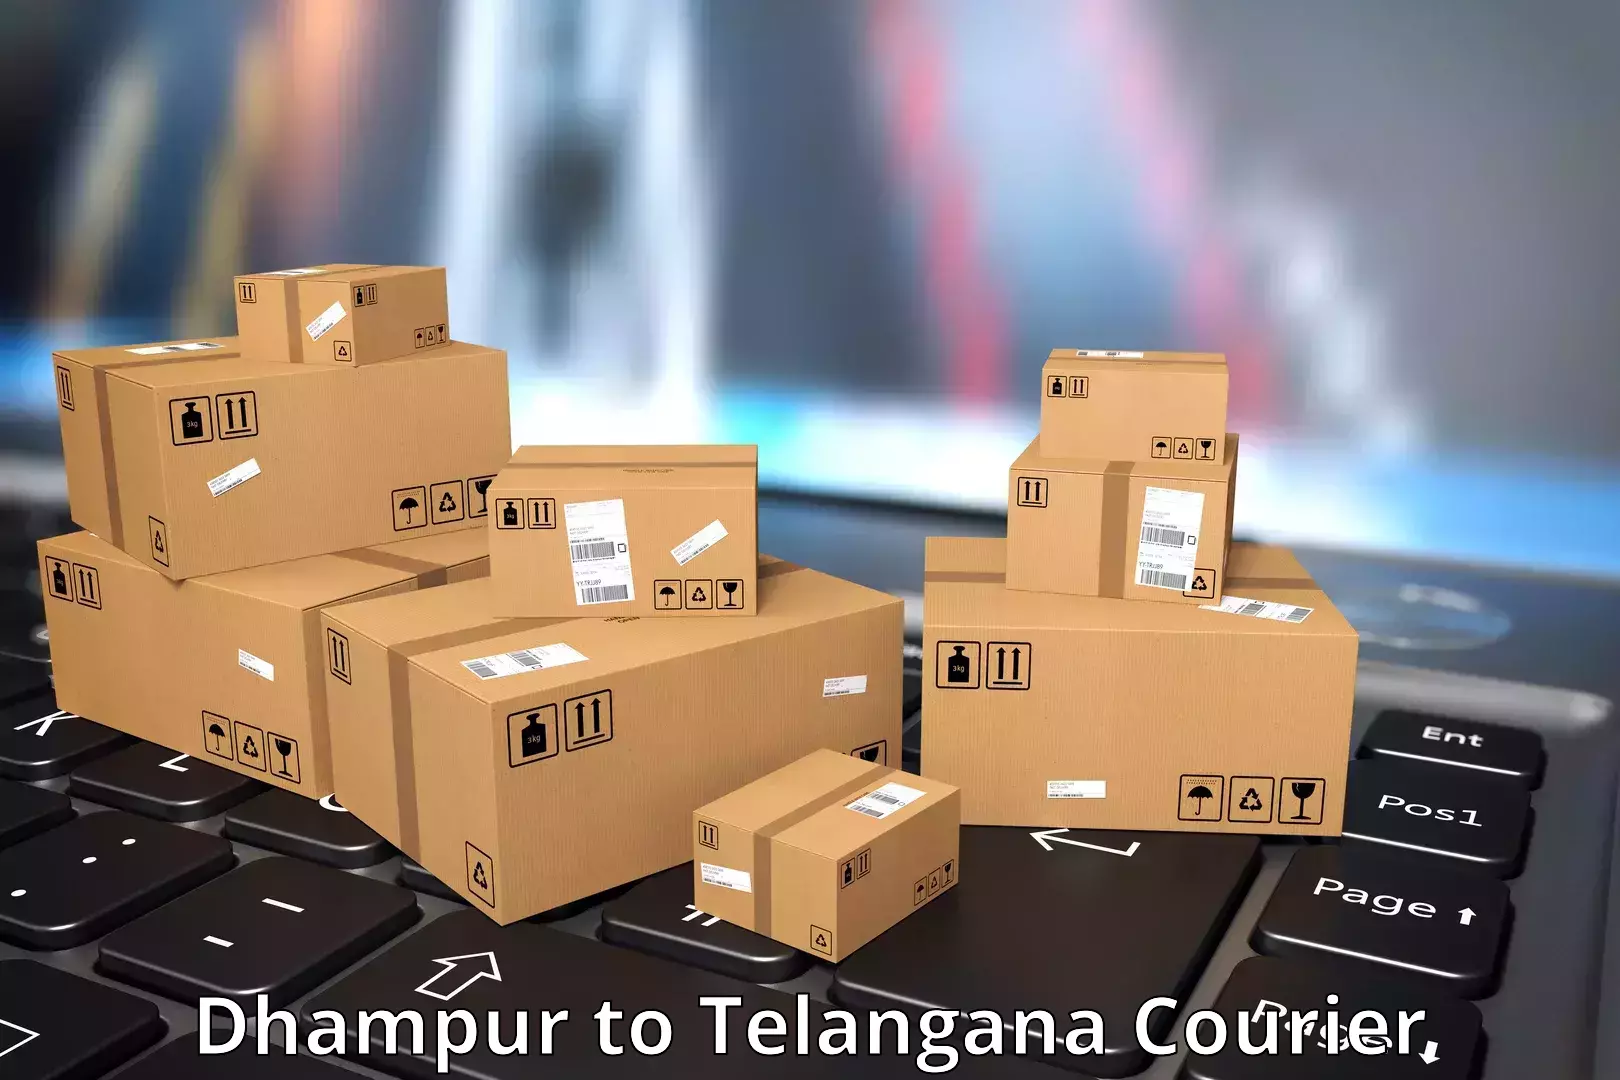 State-of-the-art courier technology Dhampur to Telangana